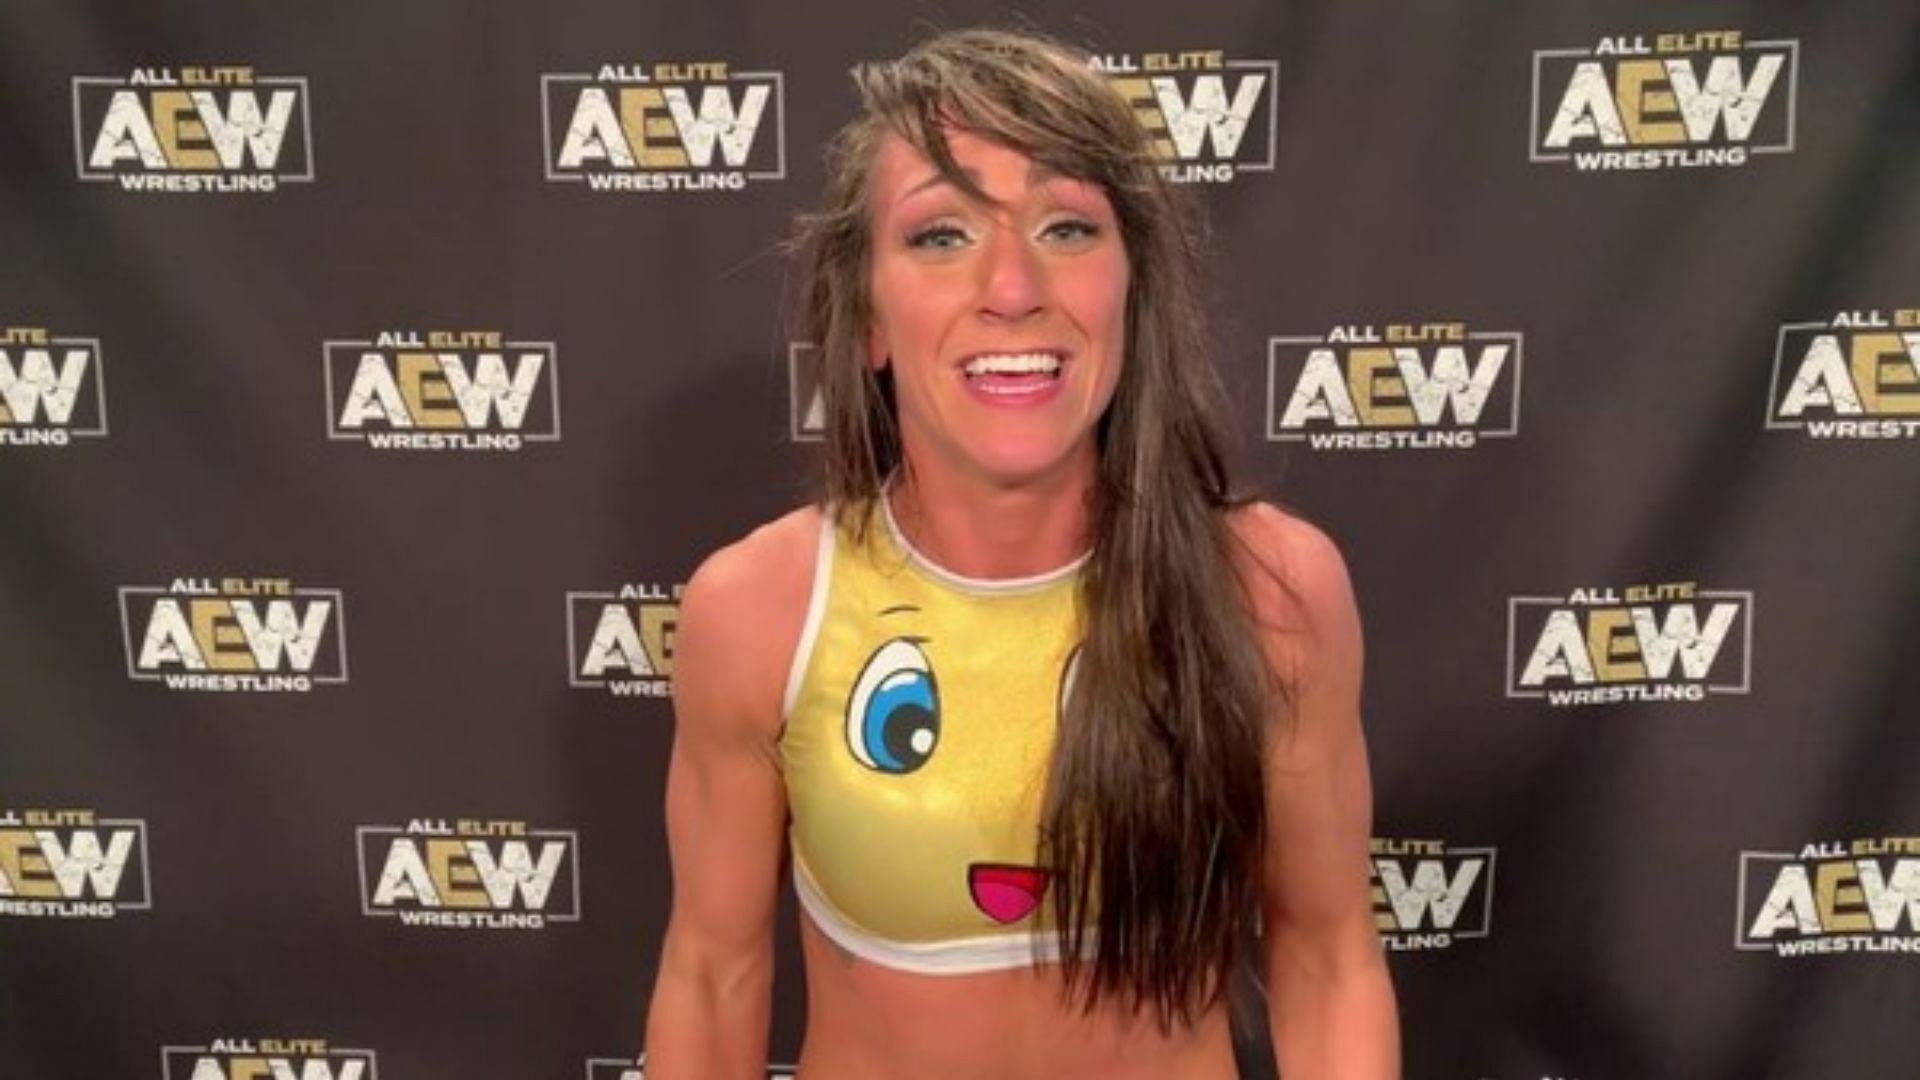 Kylie Rae continues to wrestle for NWA and on the indie circuit